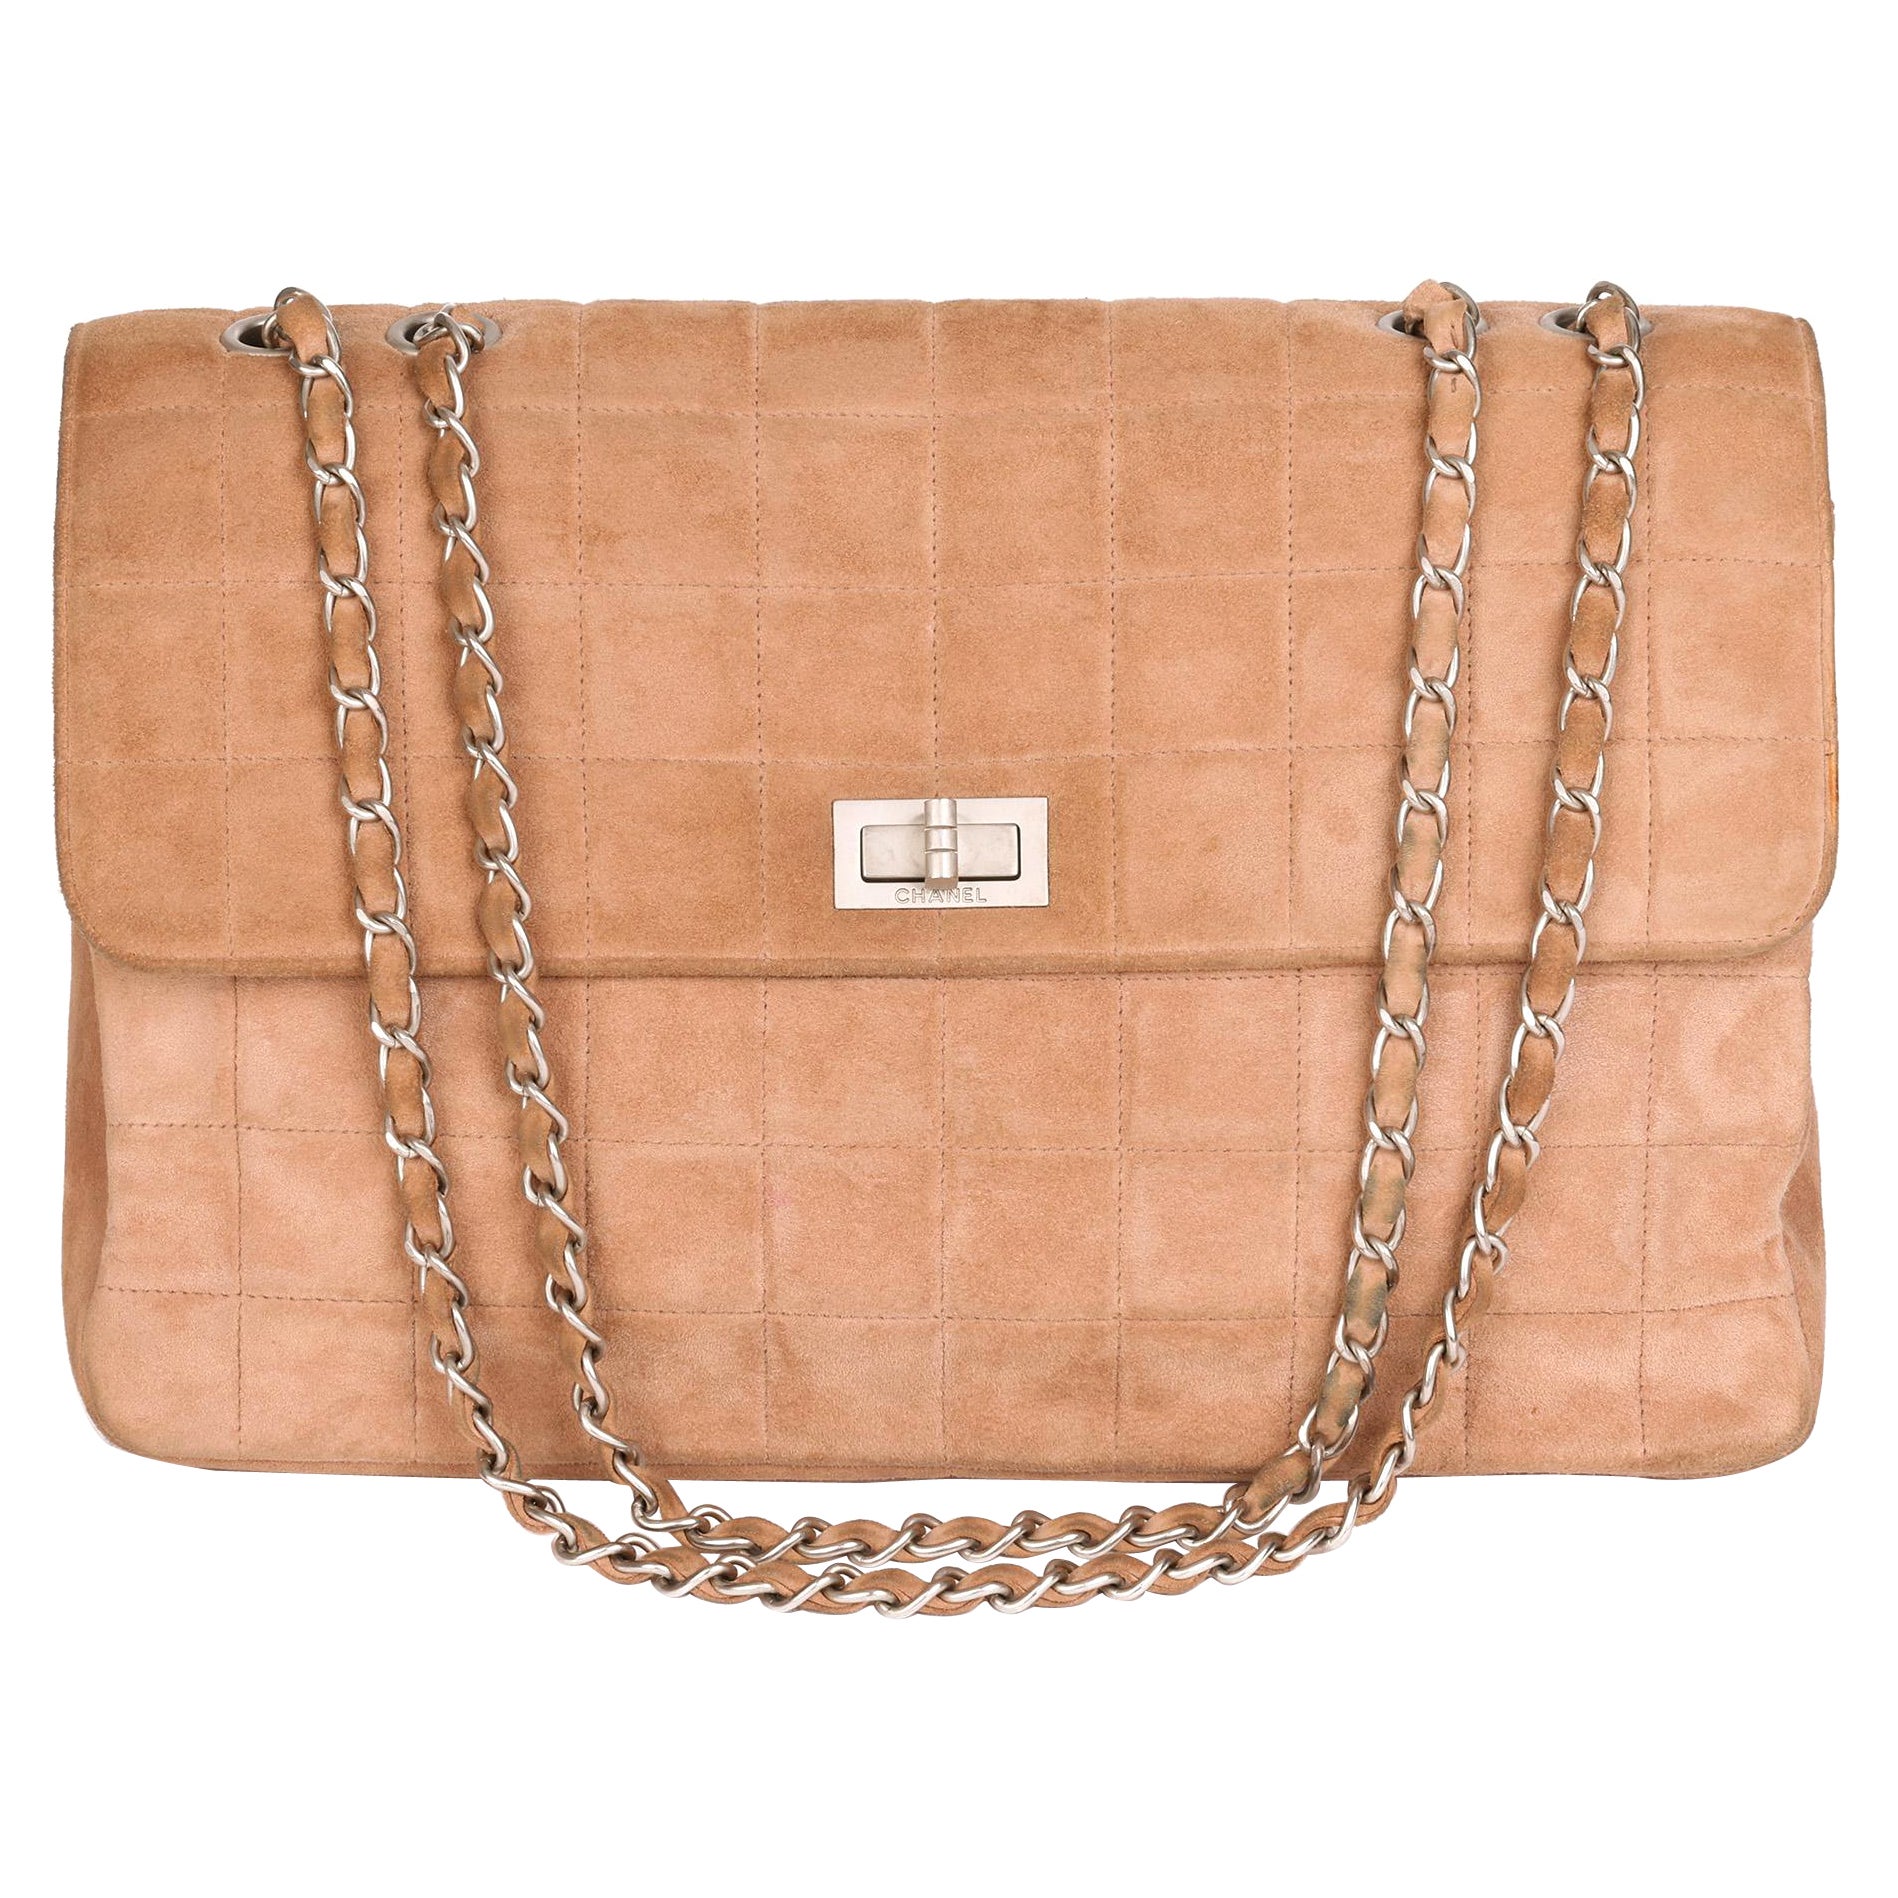 Snag the Latest CHANEL Tweed Exterior Bags & Handbags for Women with Fast  and Free Shipping. Authenticity Guaranteed on Designer Handbags $500+ at  .